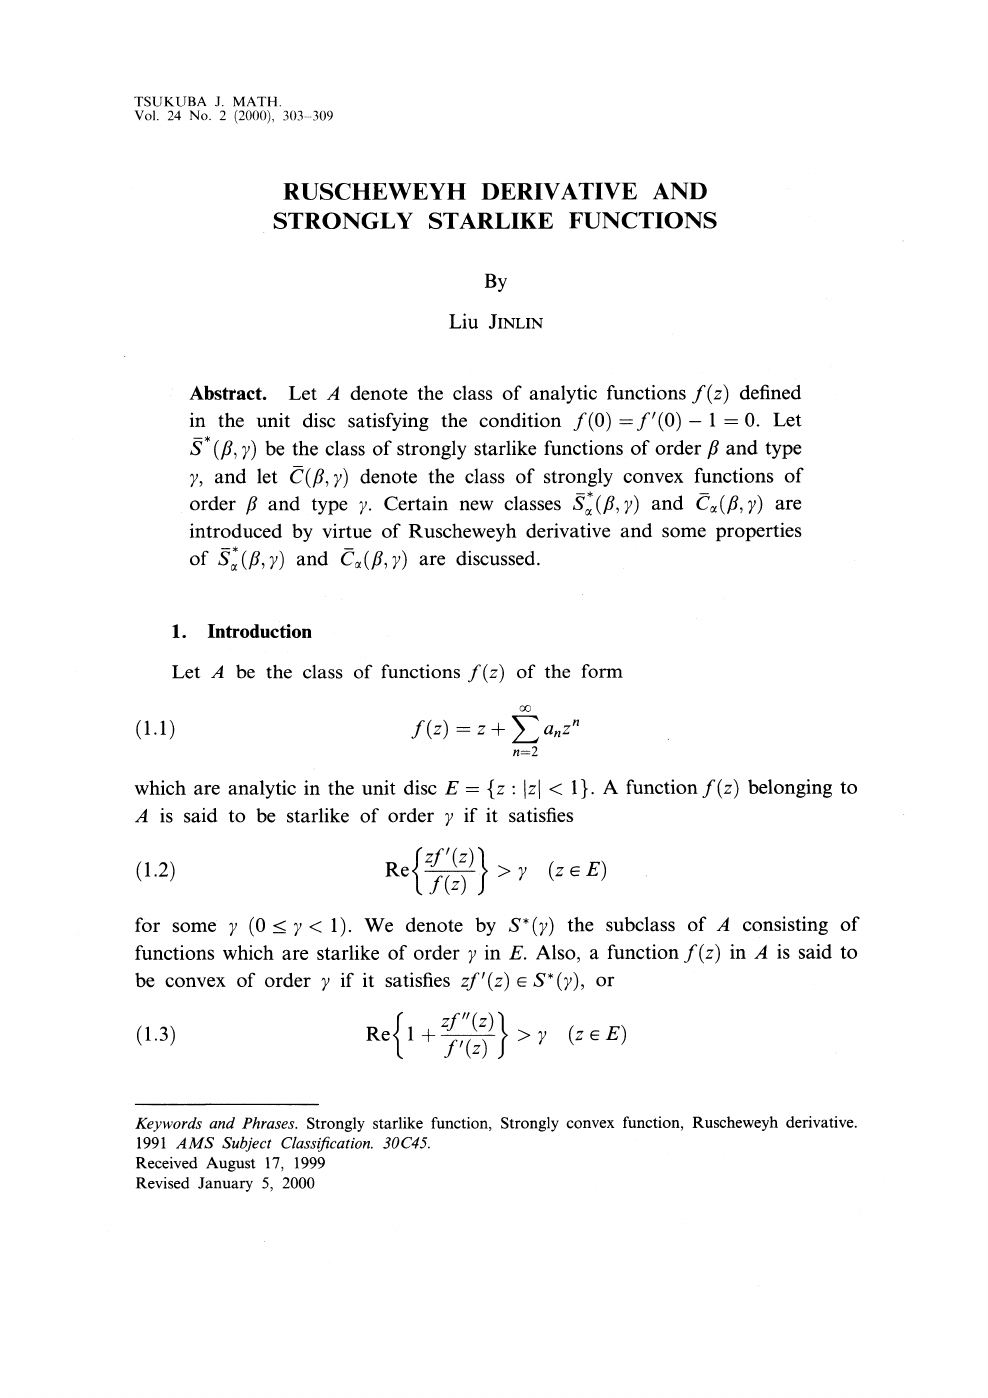 Ruscheweyh Derivative And Strongly Starlike Functions Topic Of Research Paper In Mathematics Download Scholarly Article Pdf And Read For Free On Cyberleninka Open Science Hub